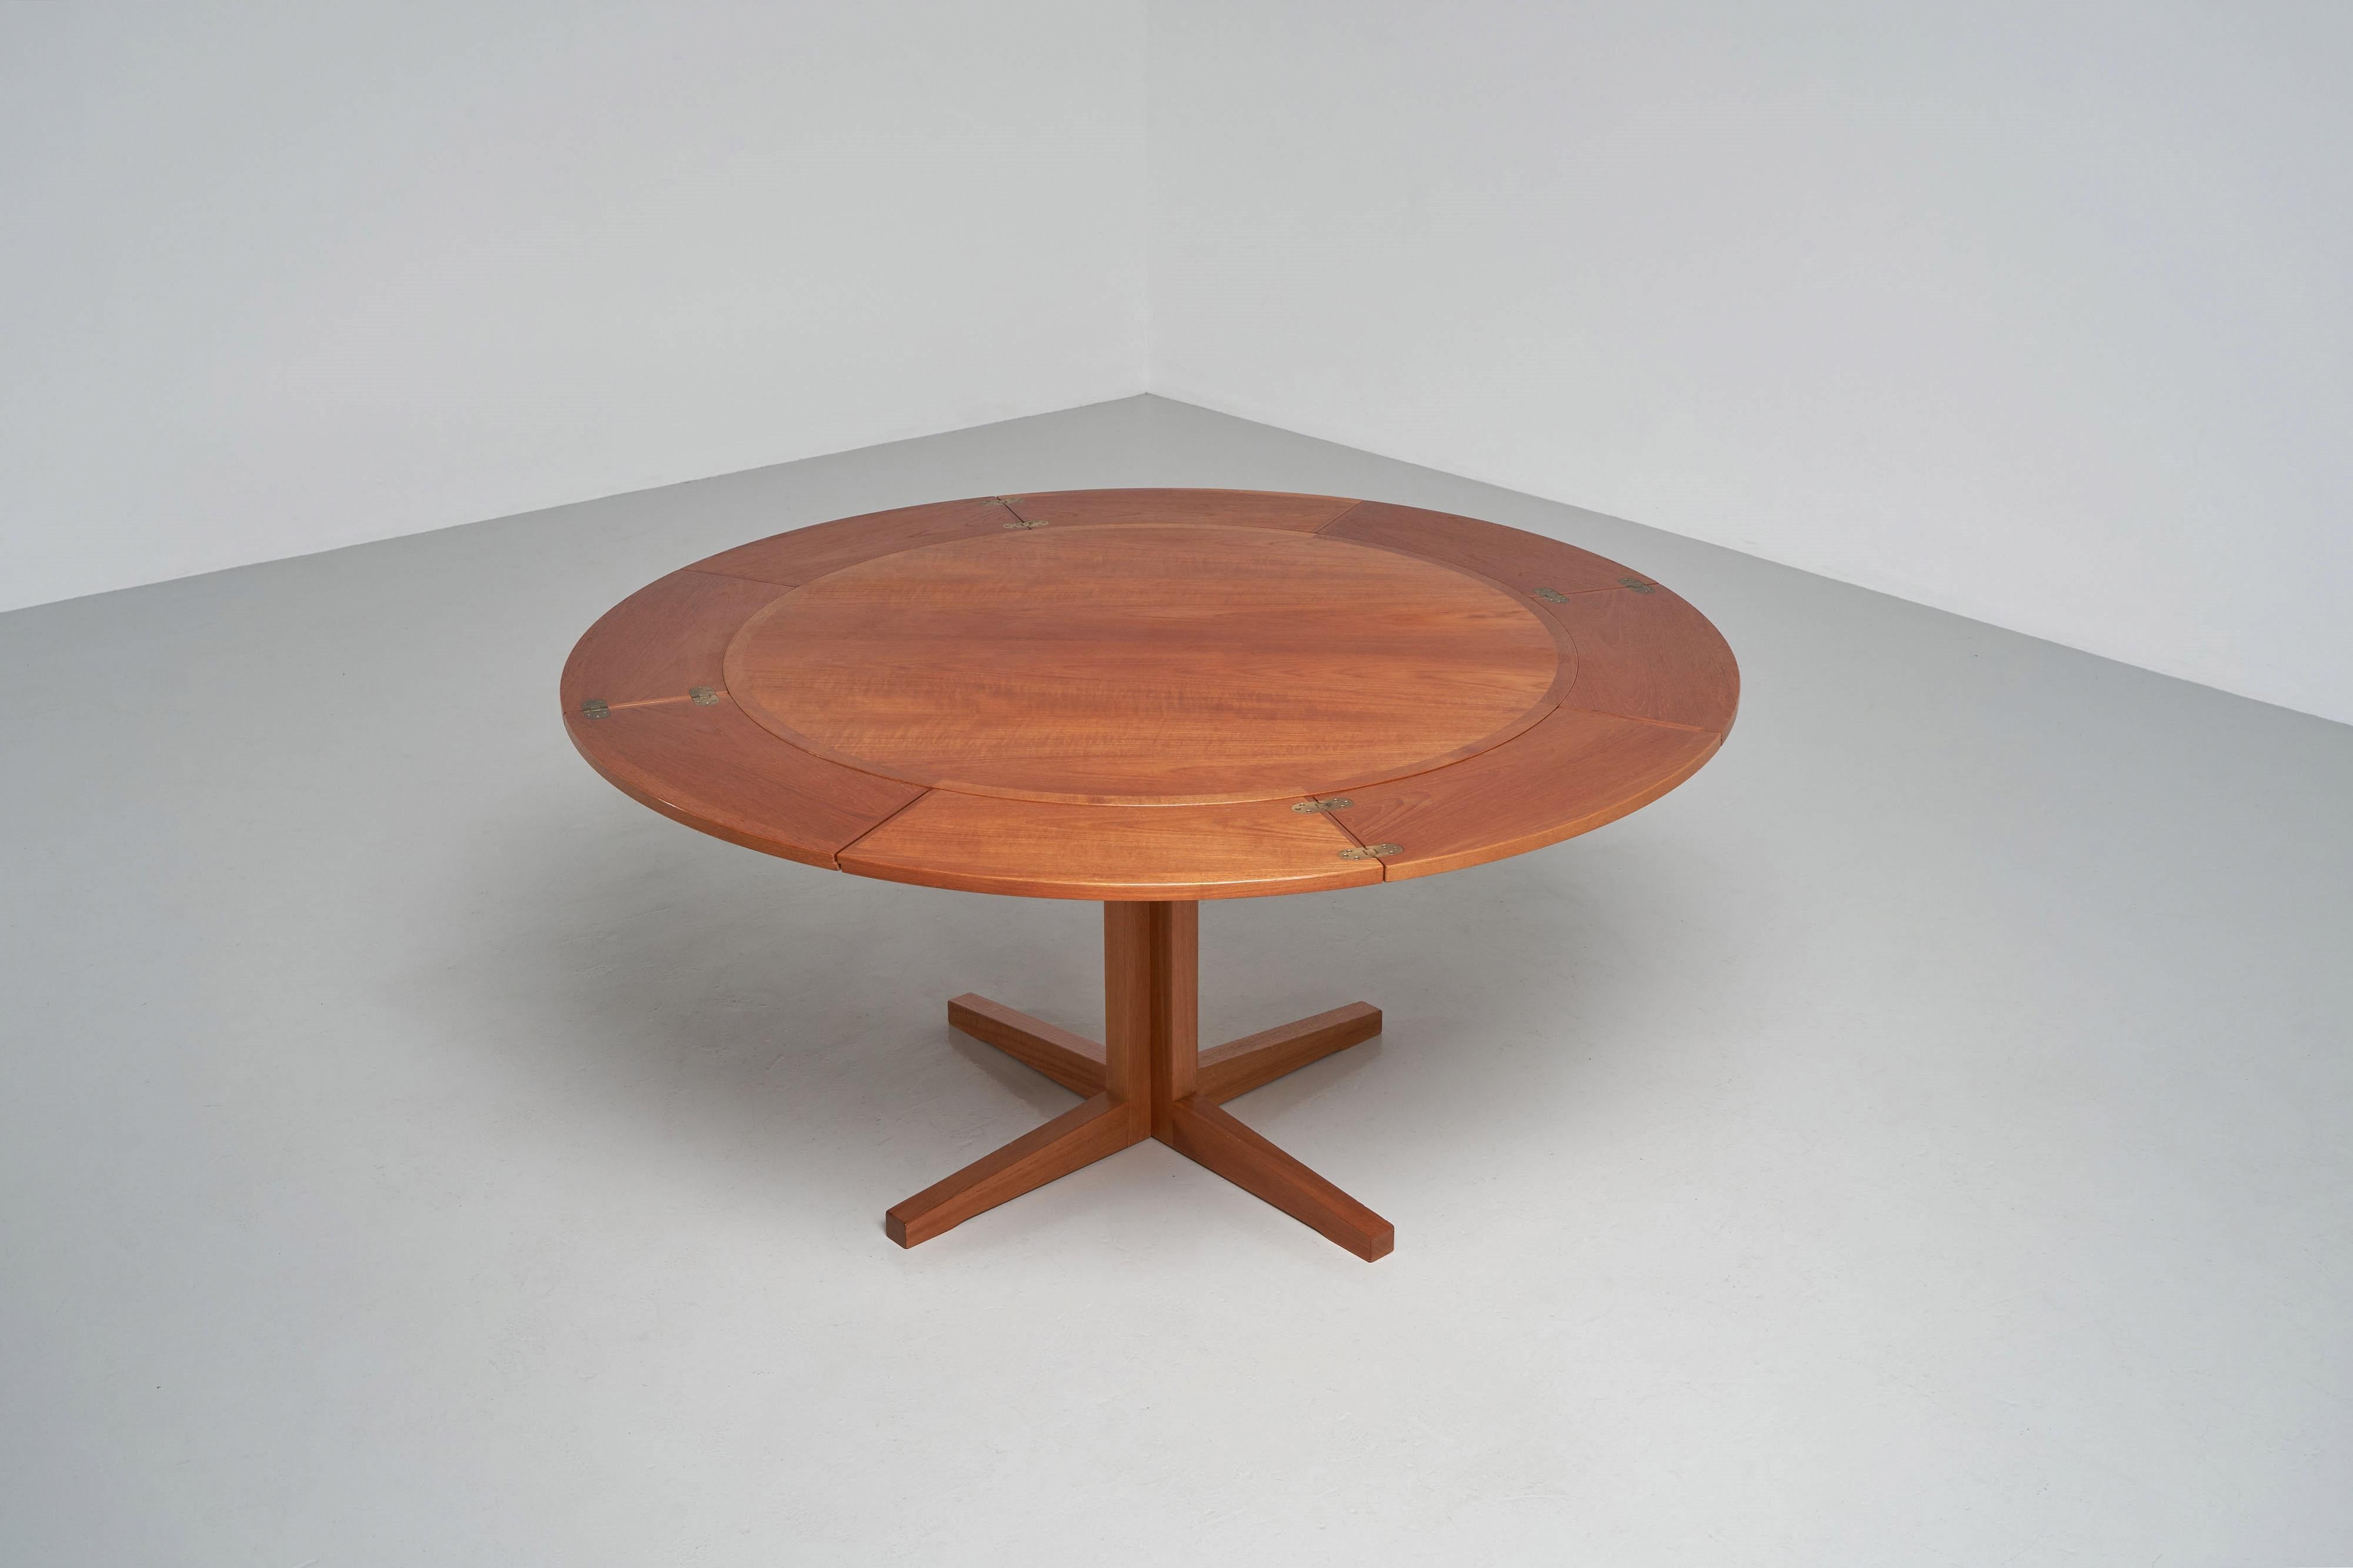 Stunning large sized round flip flap lotus top dining table designed and manufactured by Dyrlund, Denmark 1960. This table can be extended from a 110 cm diameter top to a 180 cm diameter top by unfolding the extension leaves. The four ‘flip-flap’